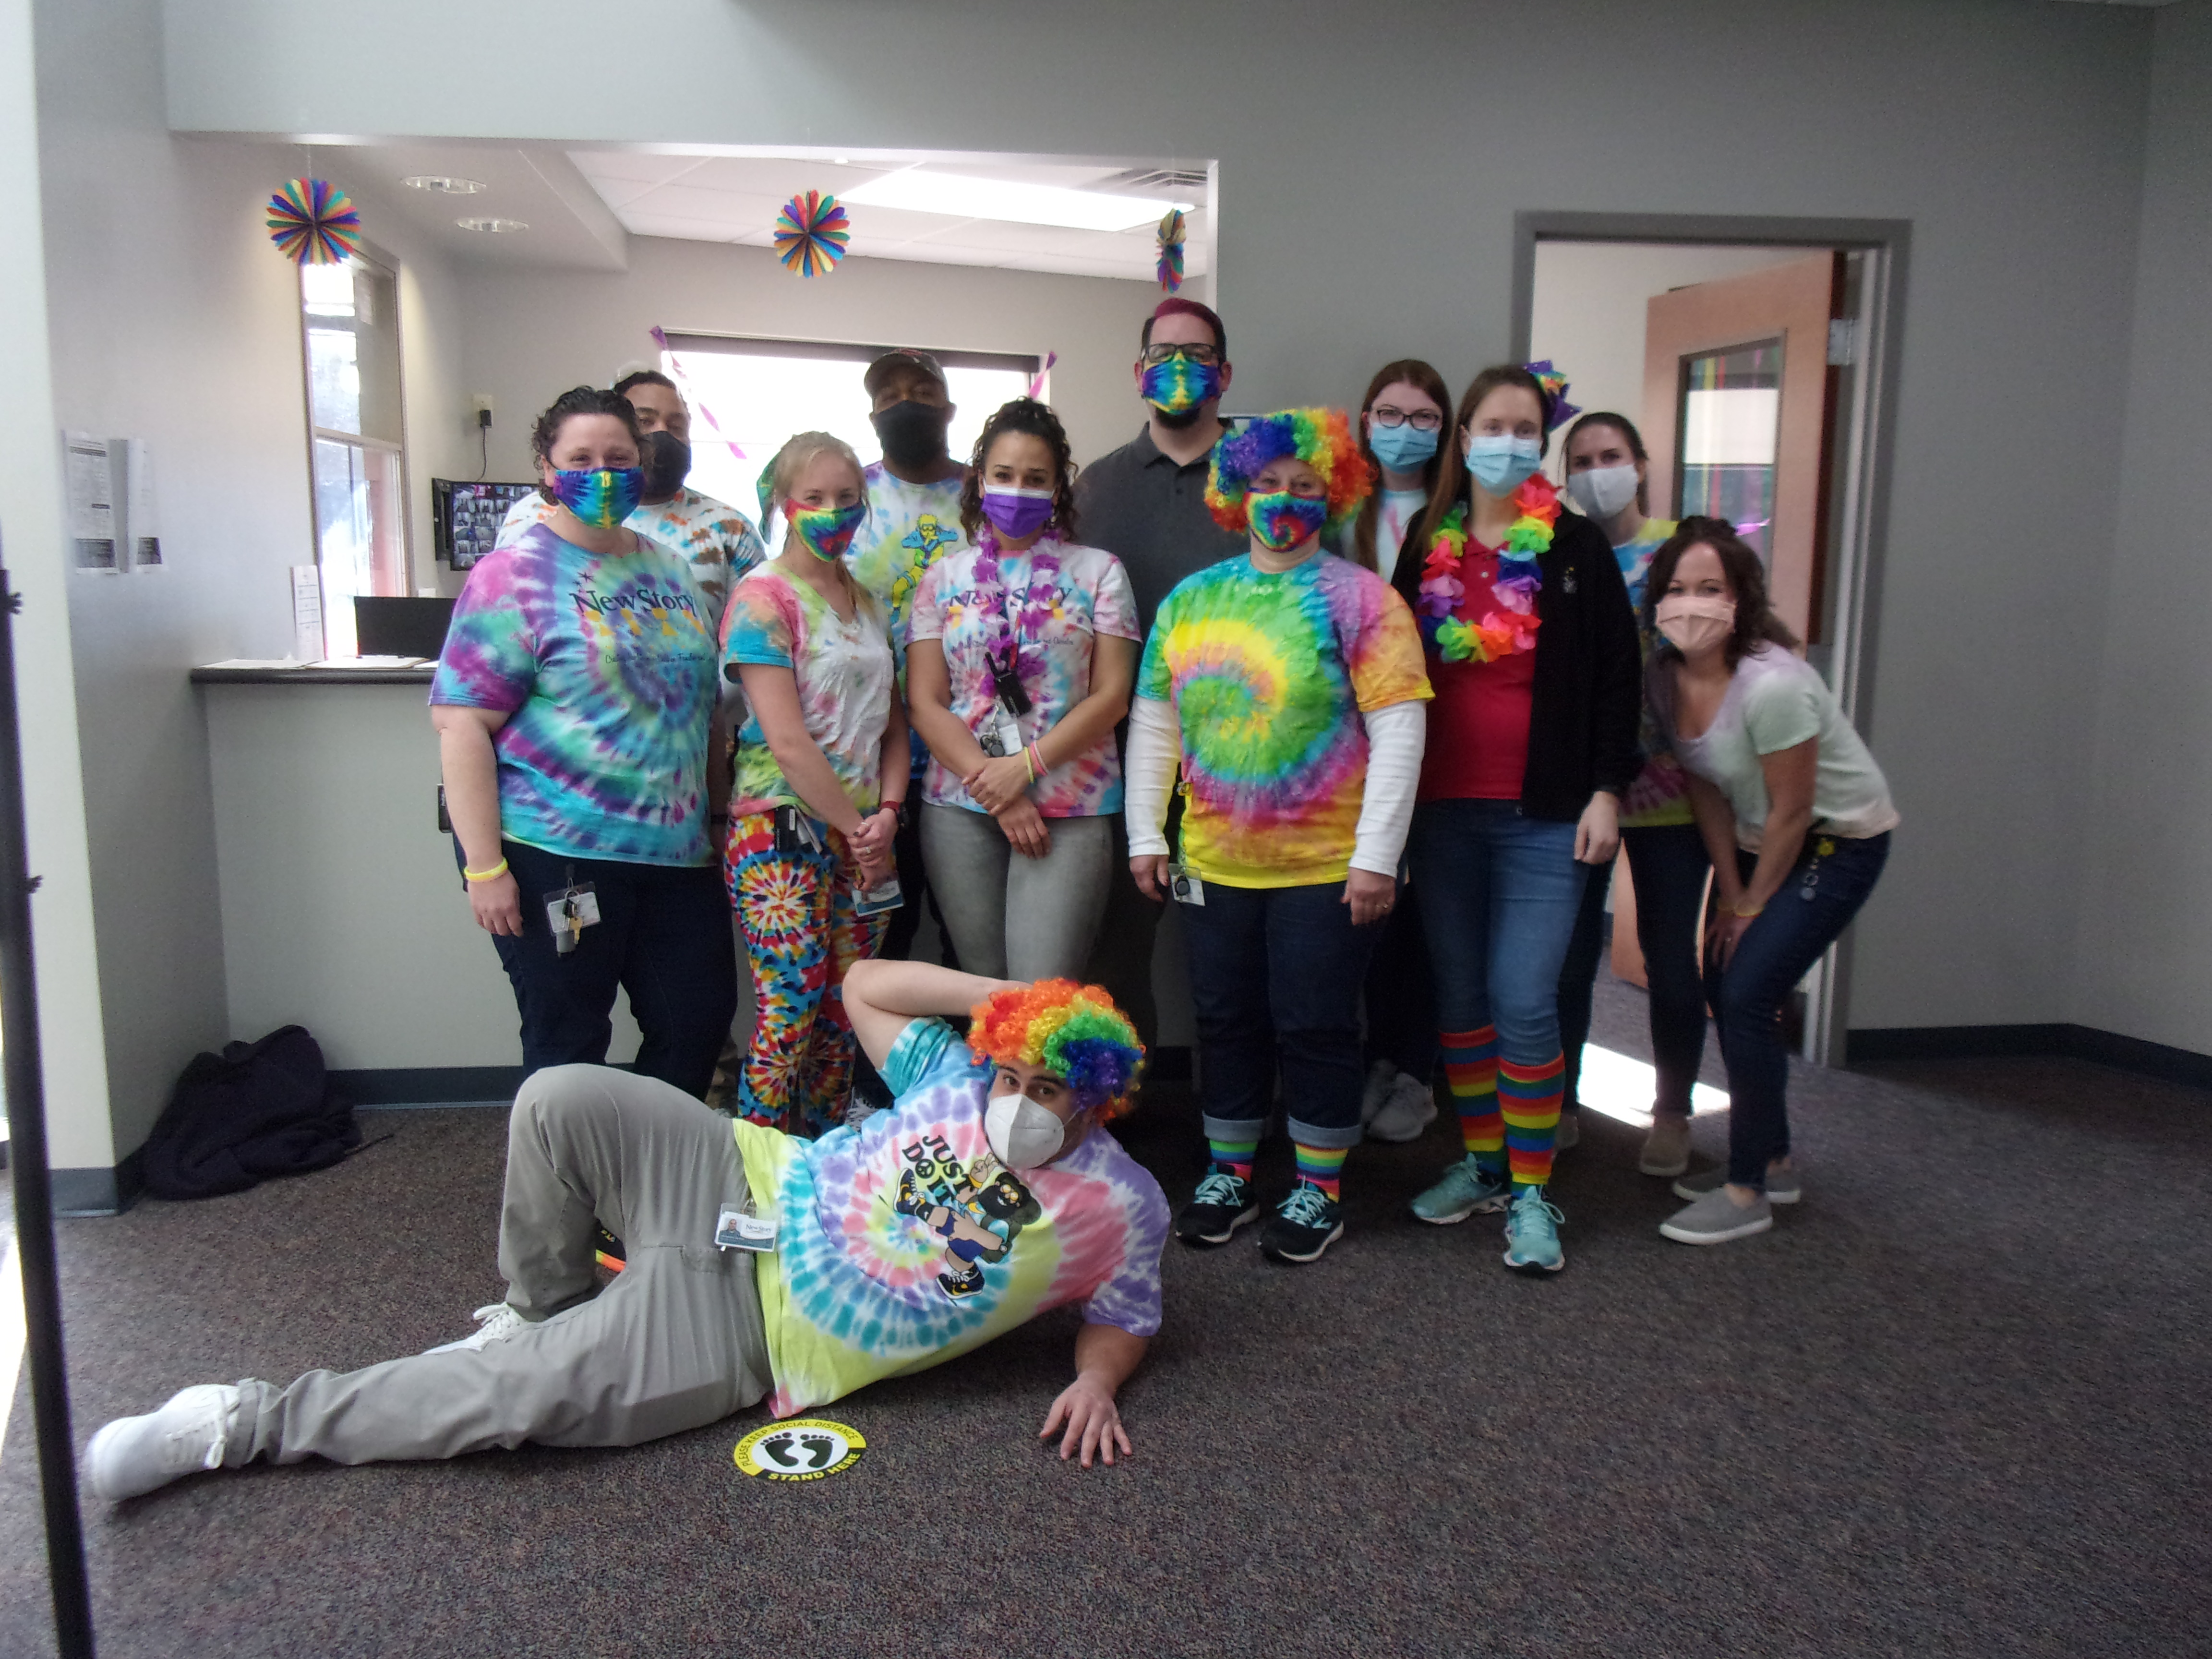 Staff dressed in tie dye, one staff member with a rainbow clown wig on is posed on the floor, the others crouch and stand by in a posed grouping.